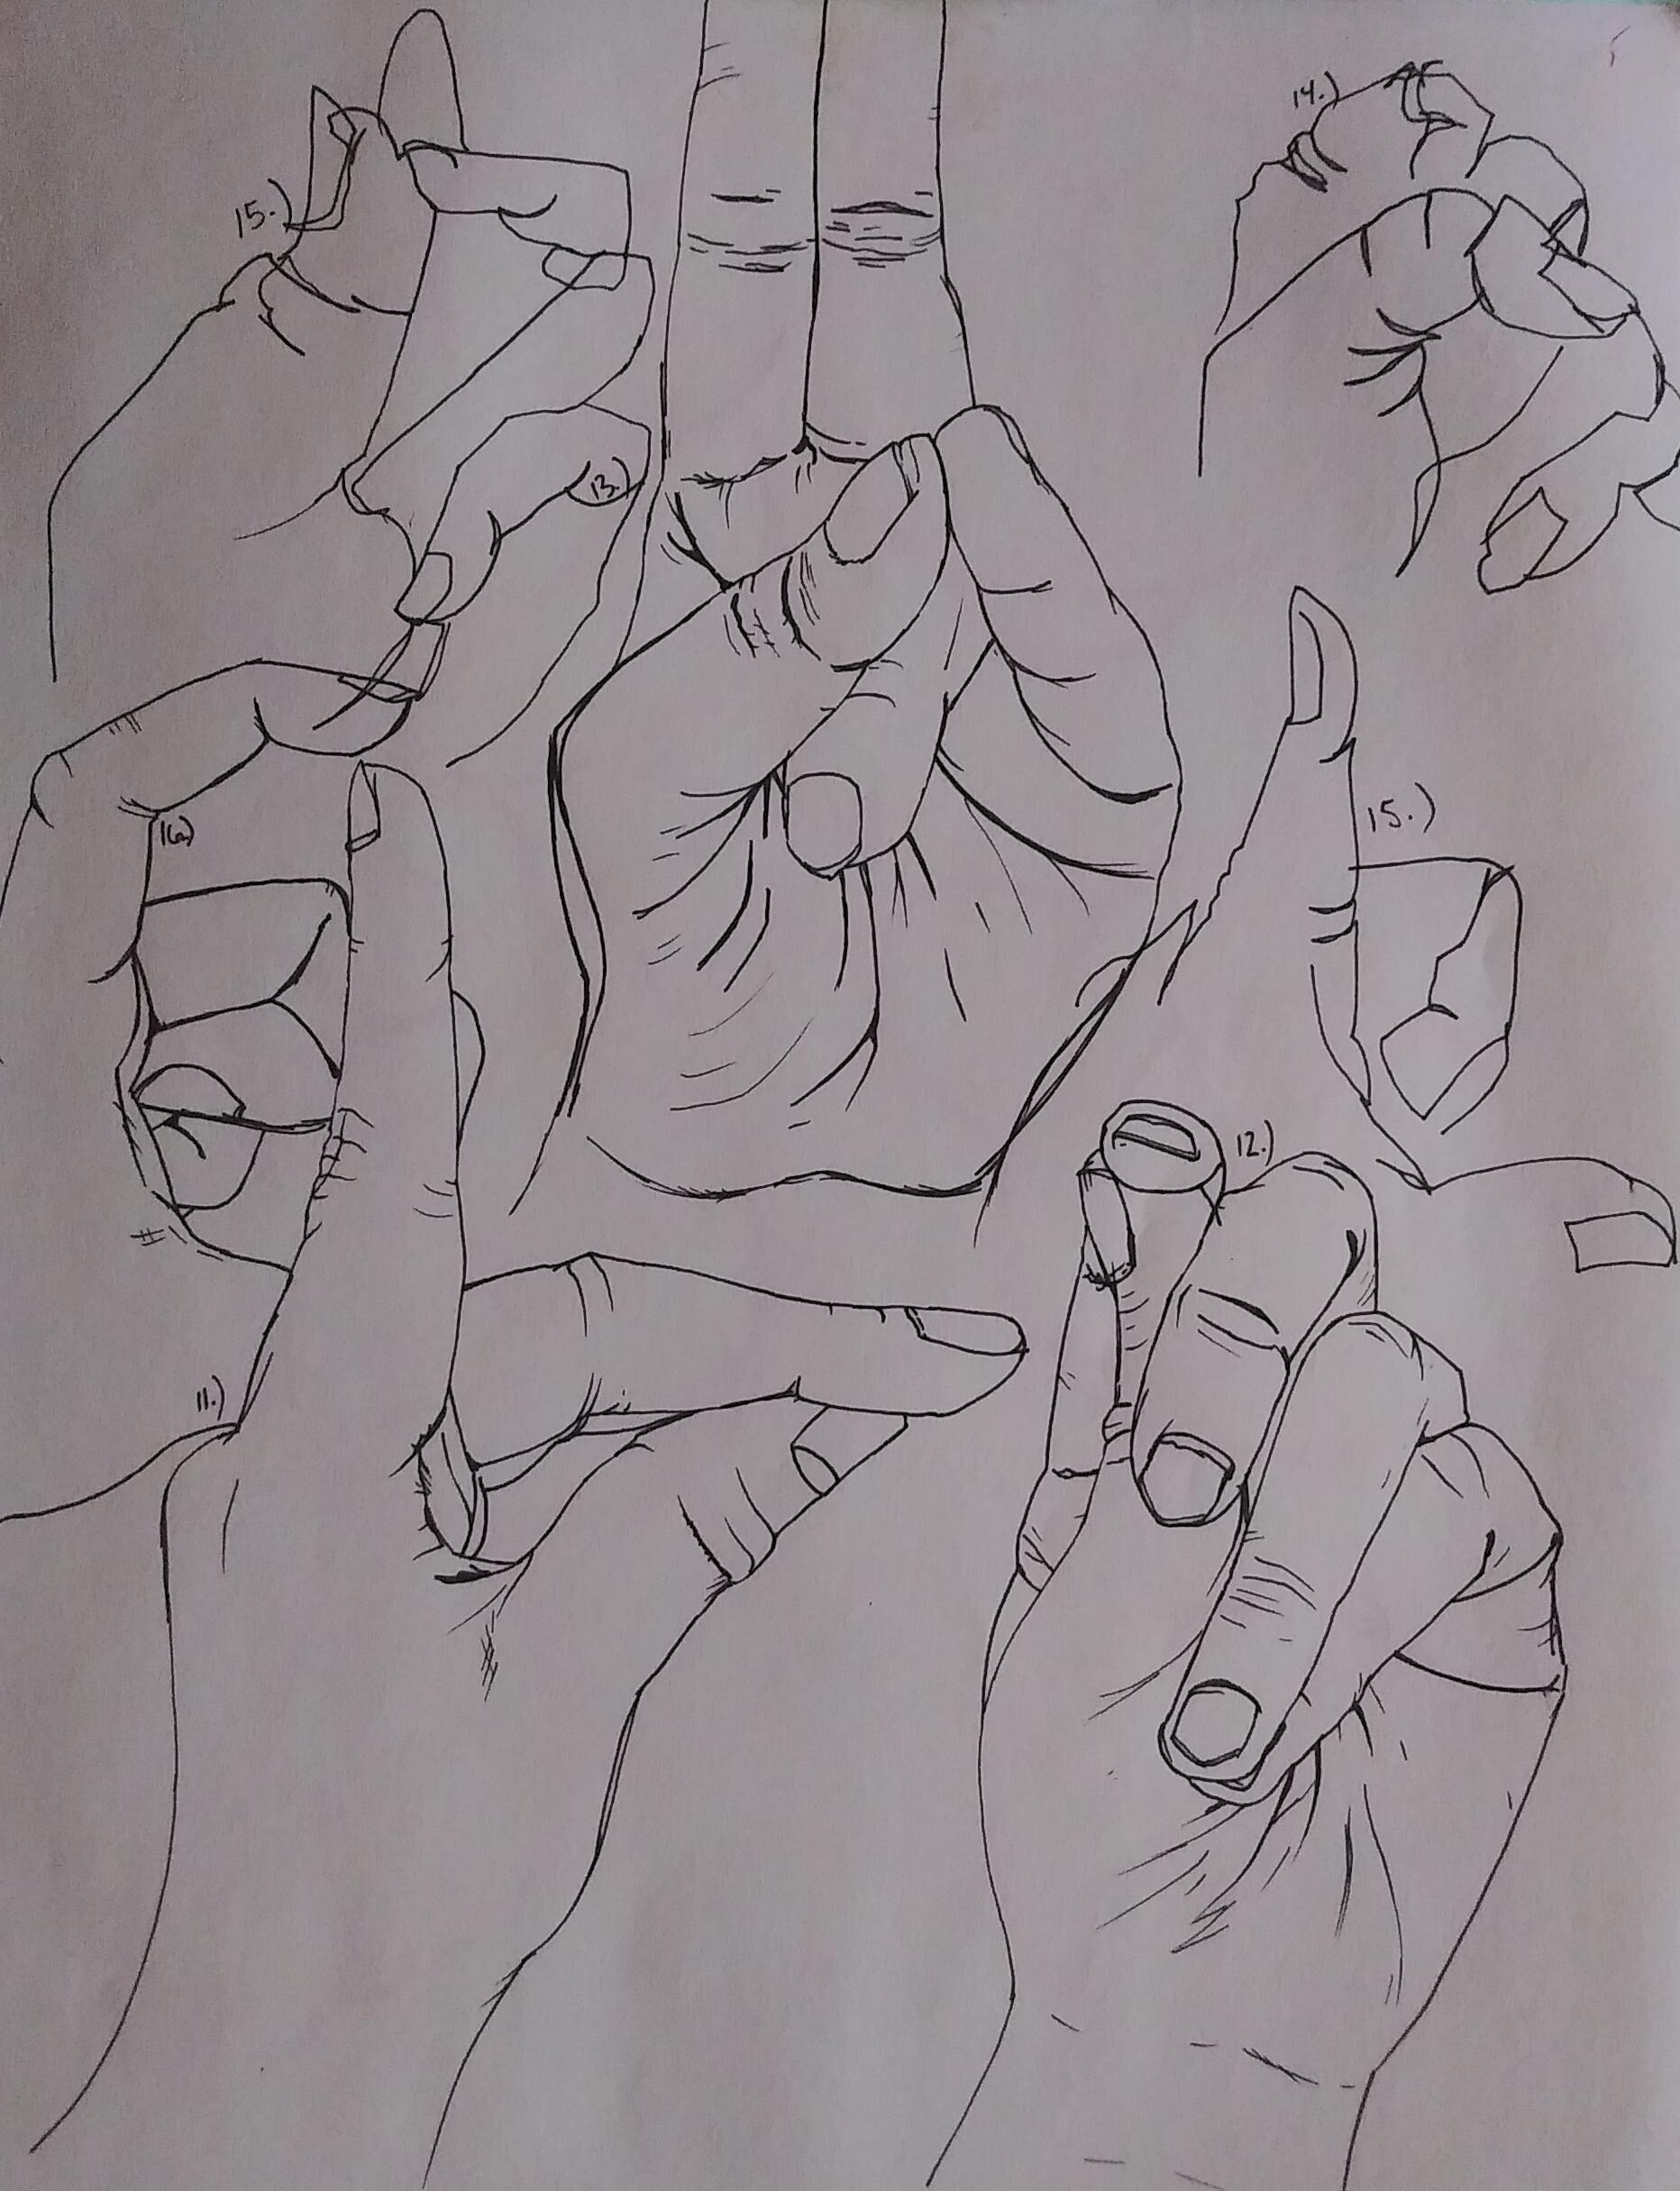 drawings on hands tumblr